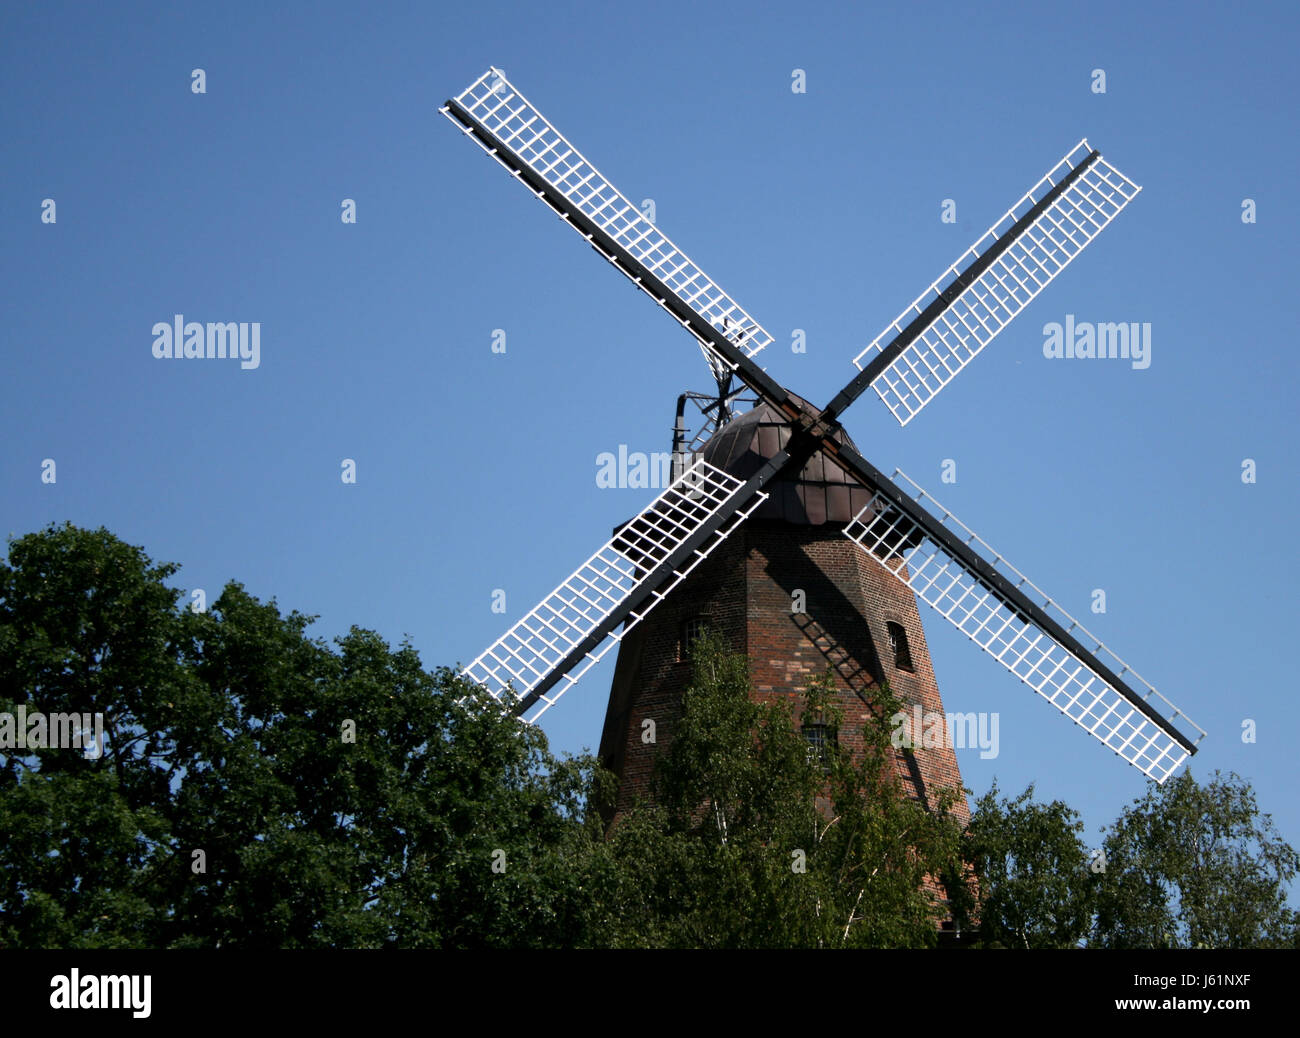 historical energy power electricity electric power windmill mill wind energy Stock Photo